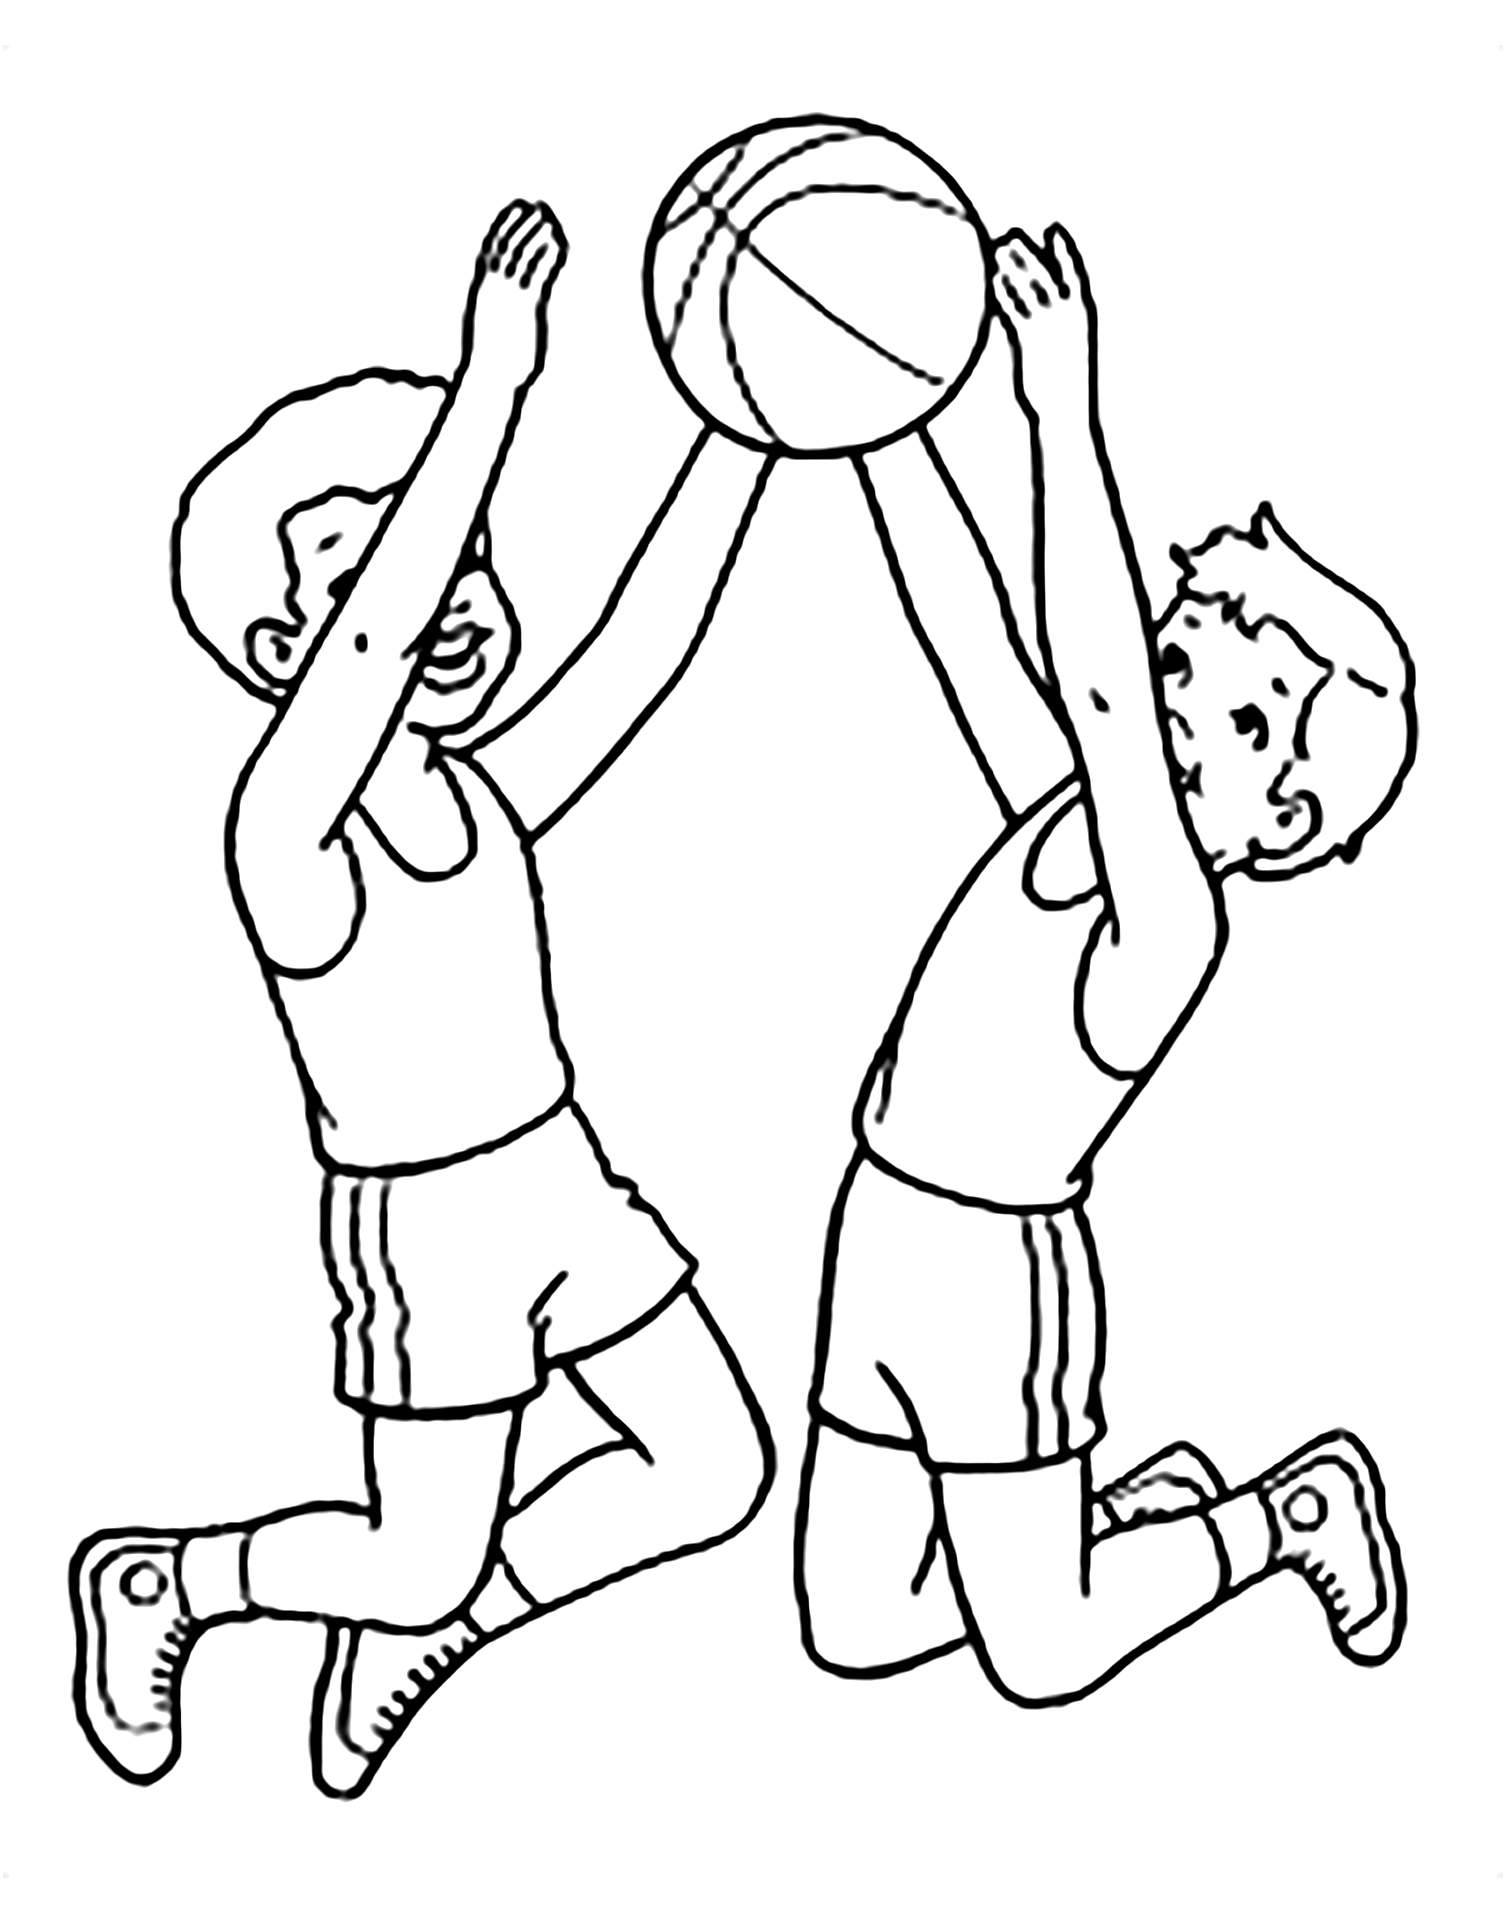 Free basketball drawing to download and color - Basketball Kids ...